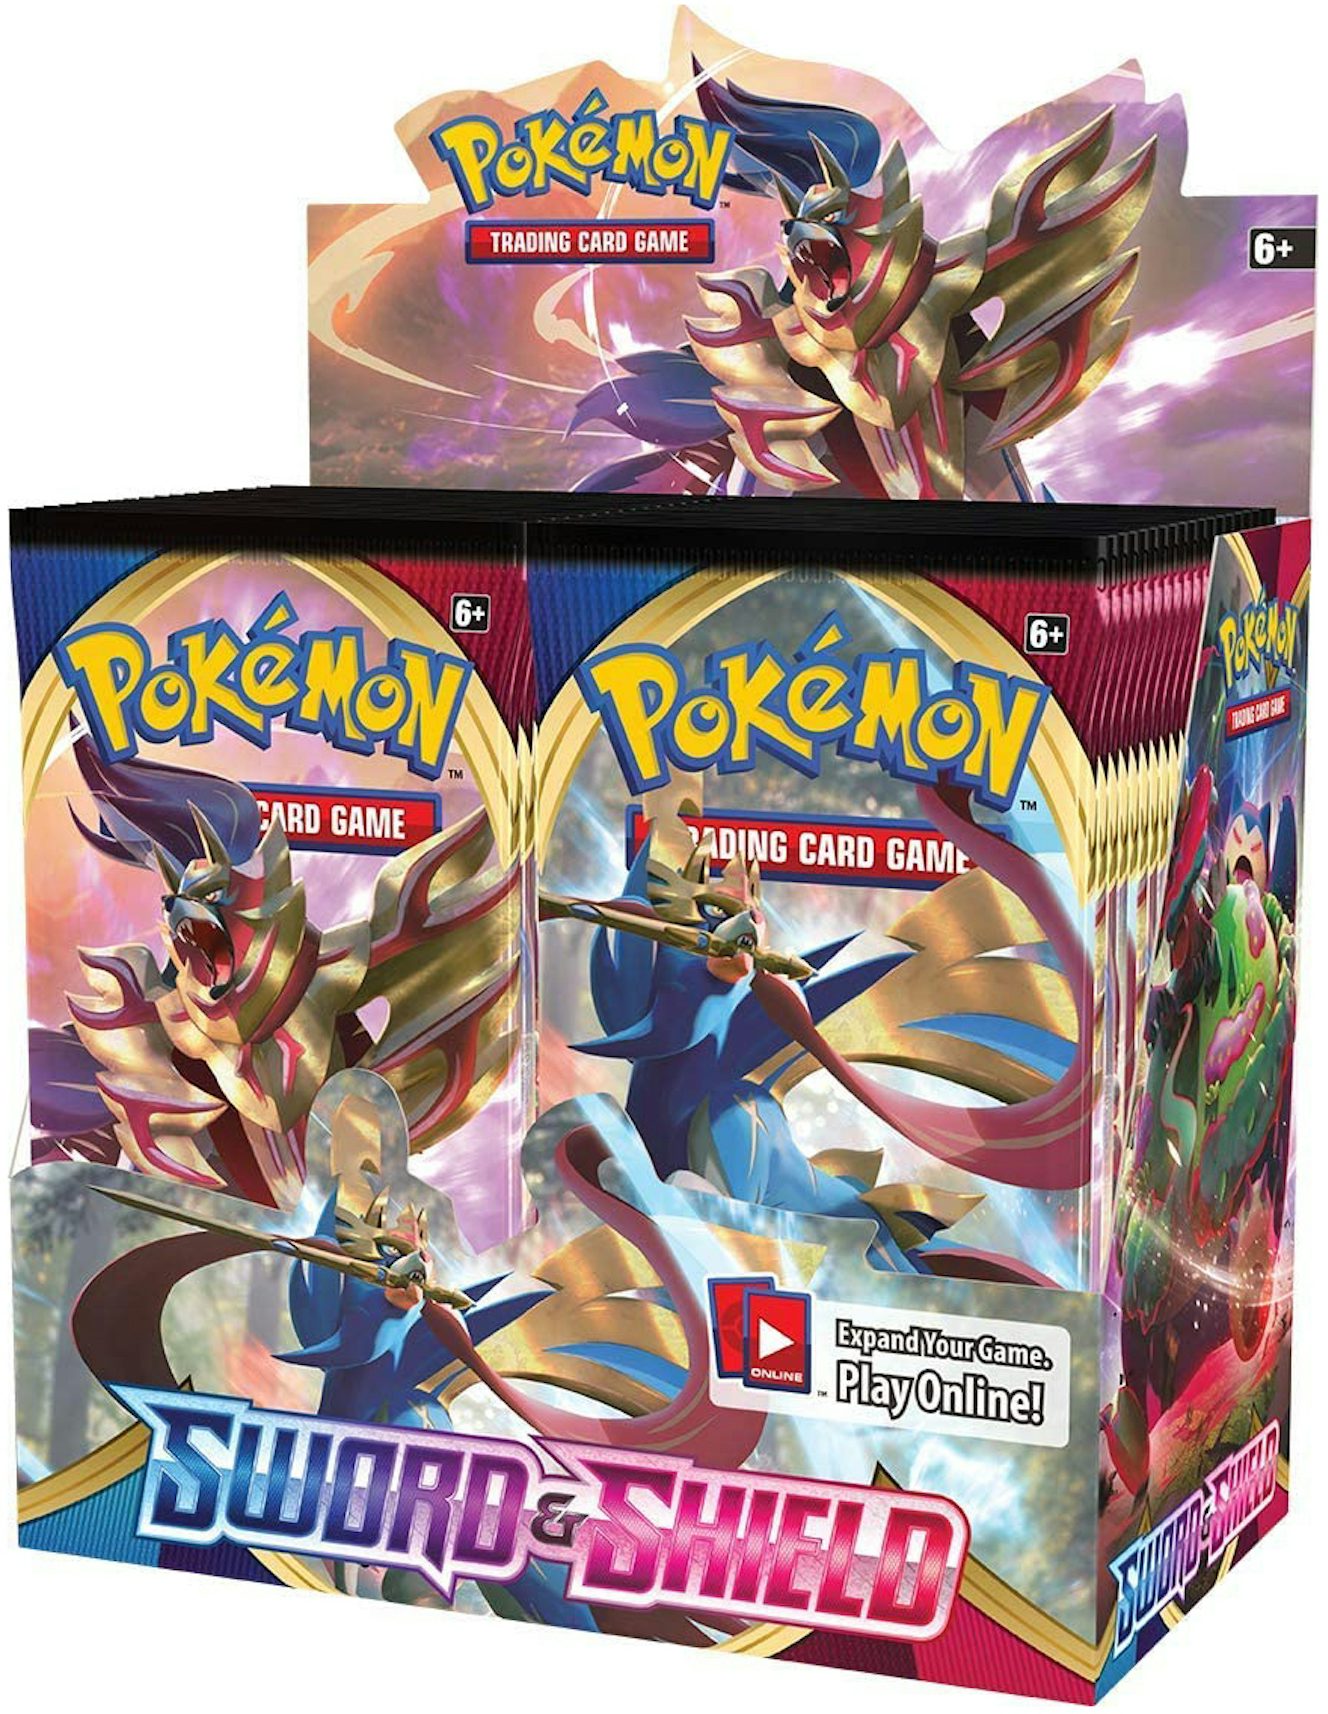 https://images.stockx.com/images/2020-Pokemon-Sword-and-Shield-Booster-Box-Updated.jpg?fit=fill&bg=FFFFFF&w=1200&h=857&fm=jpg&auto=compress&dpr=2&trim=color&updated_at=1648846739&q=60